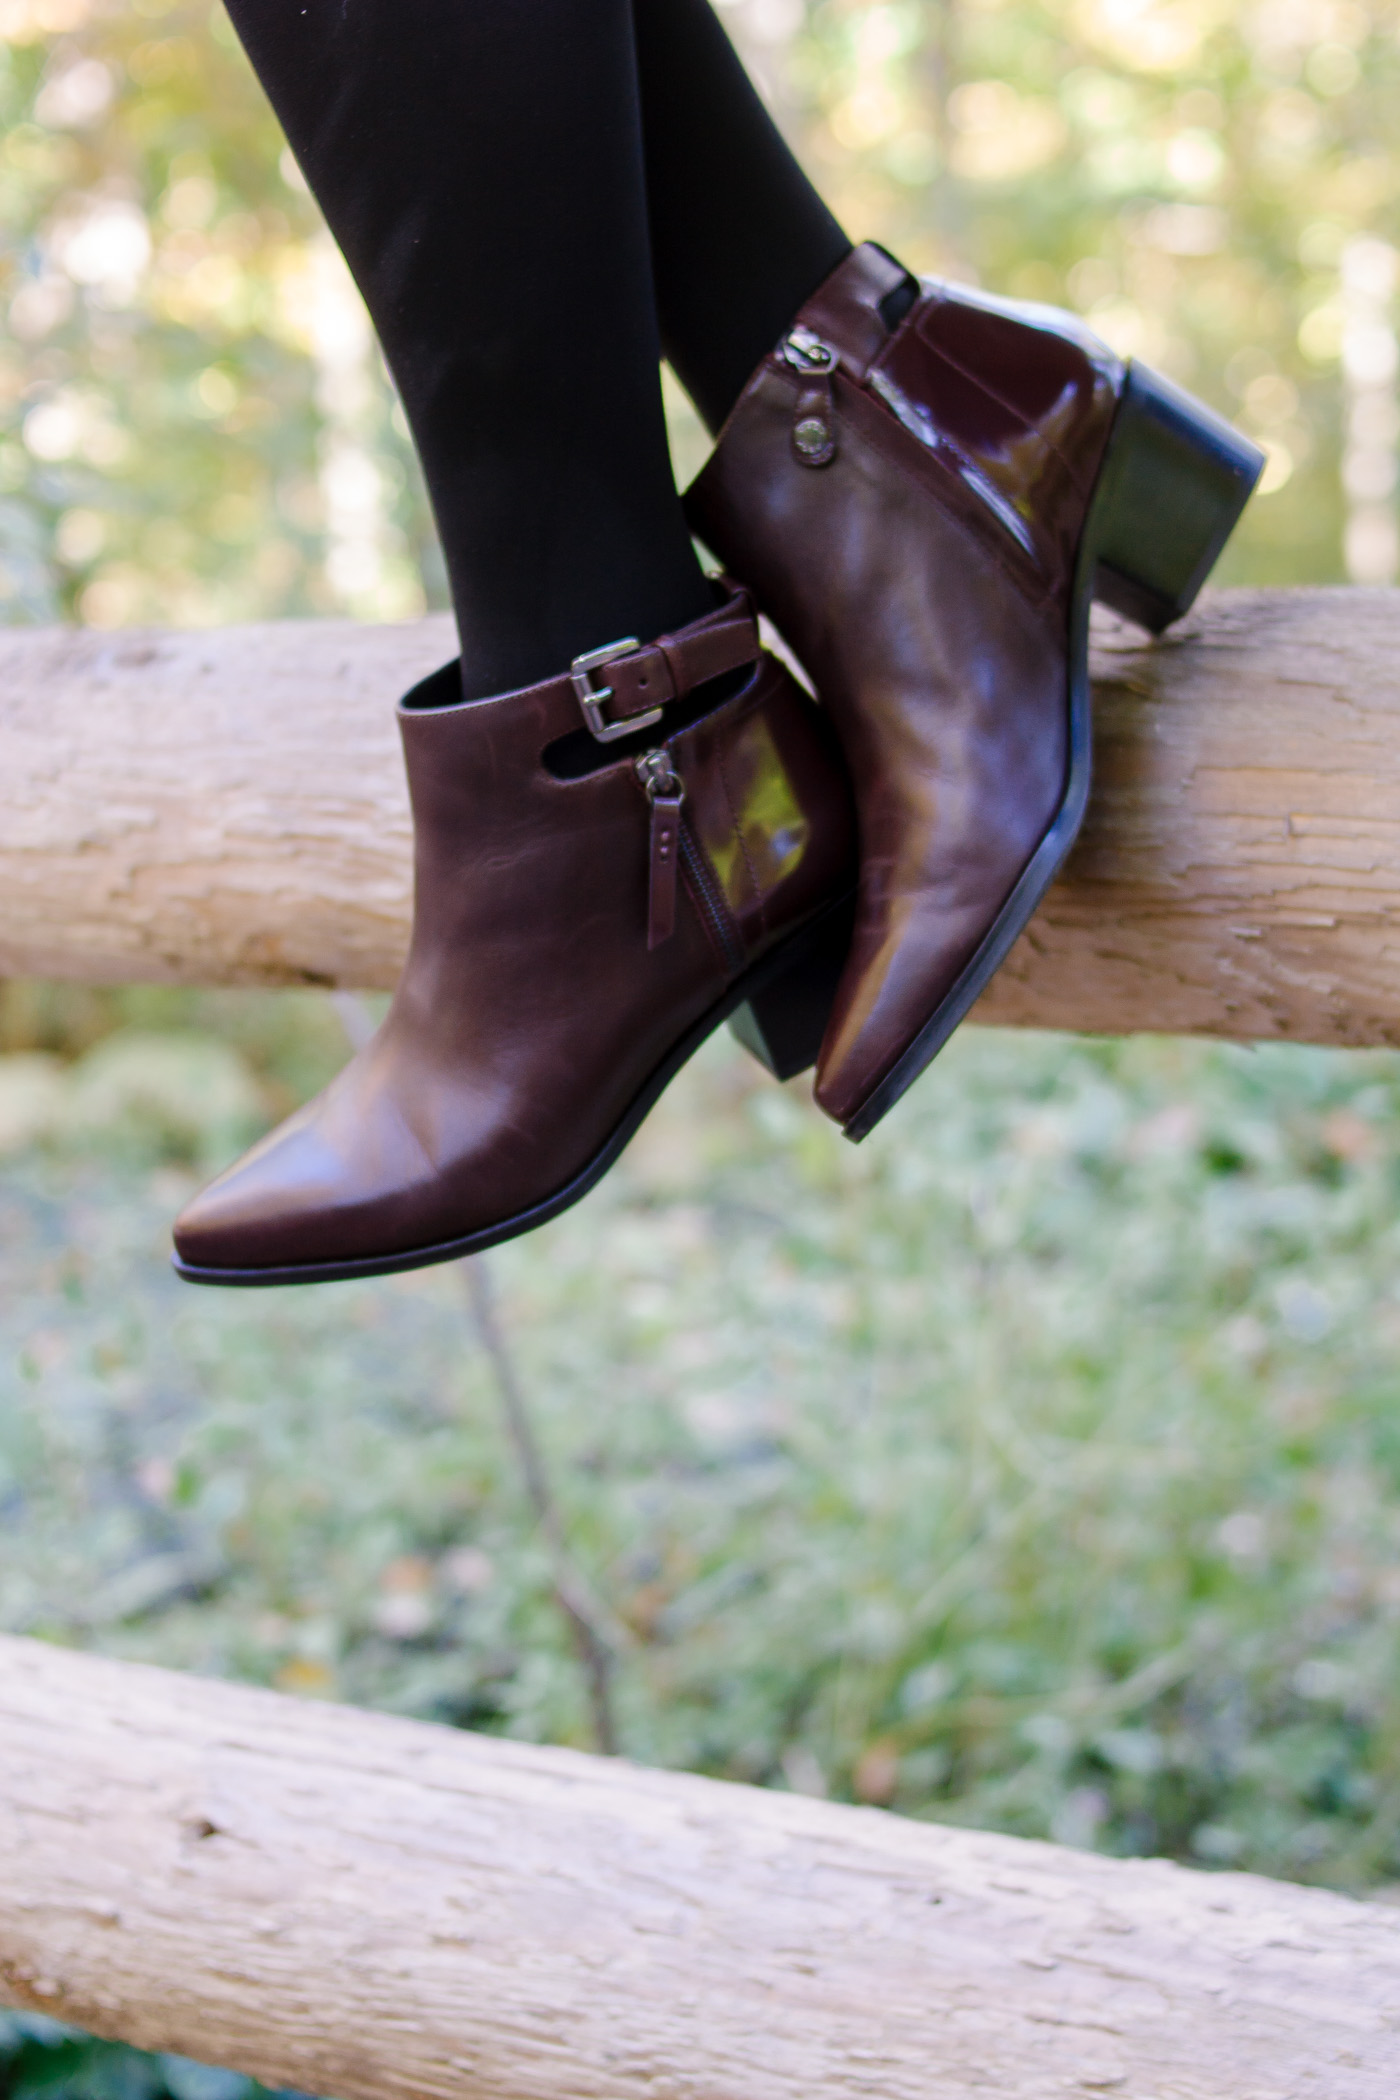 In With The New! Fresh Blog Design & Geox Boots For Fall | The Clydescope